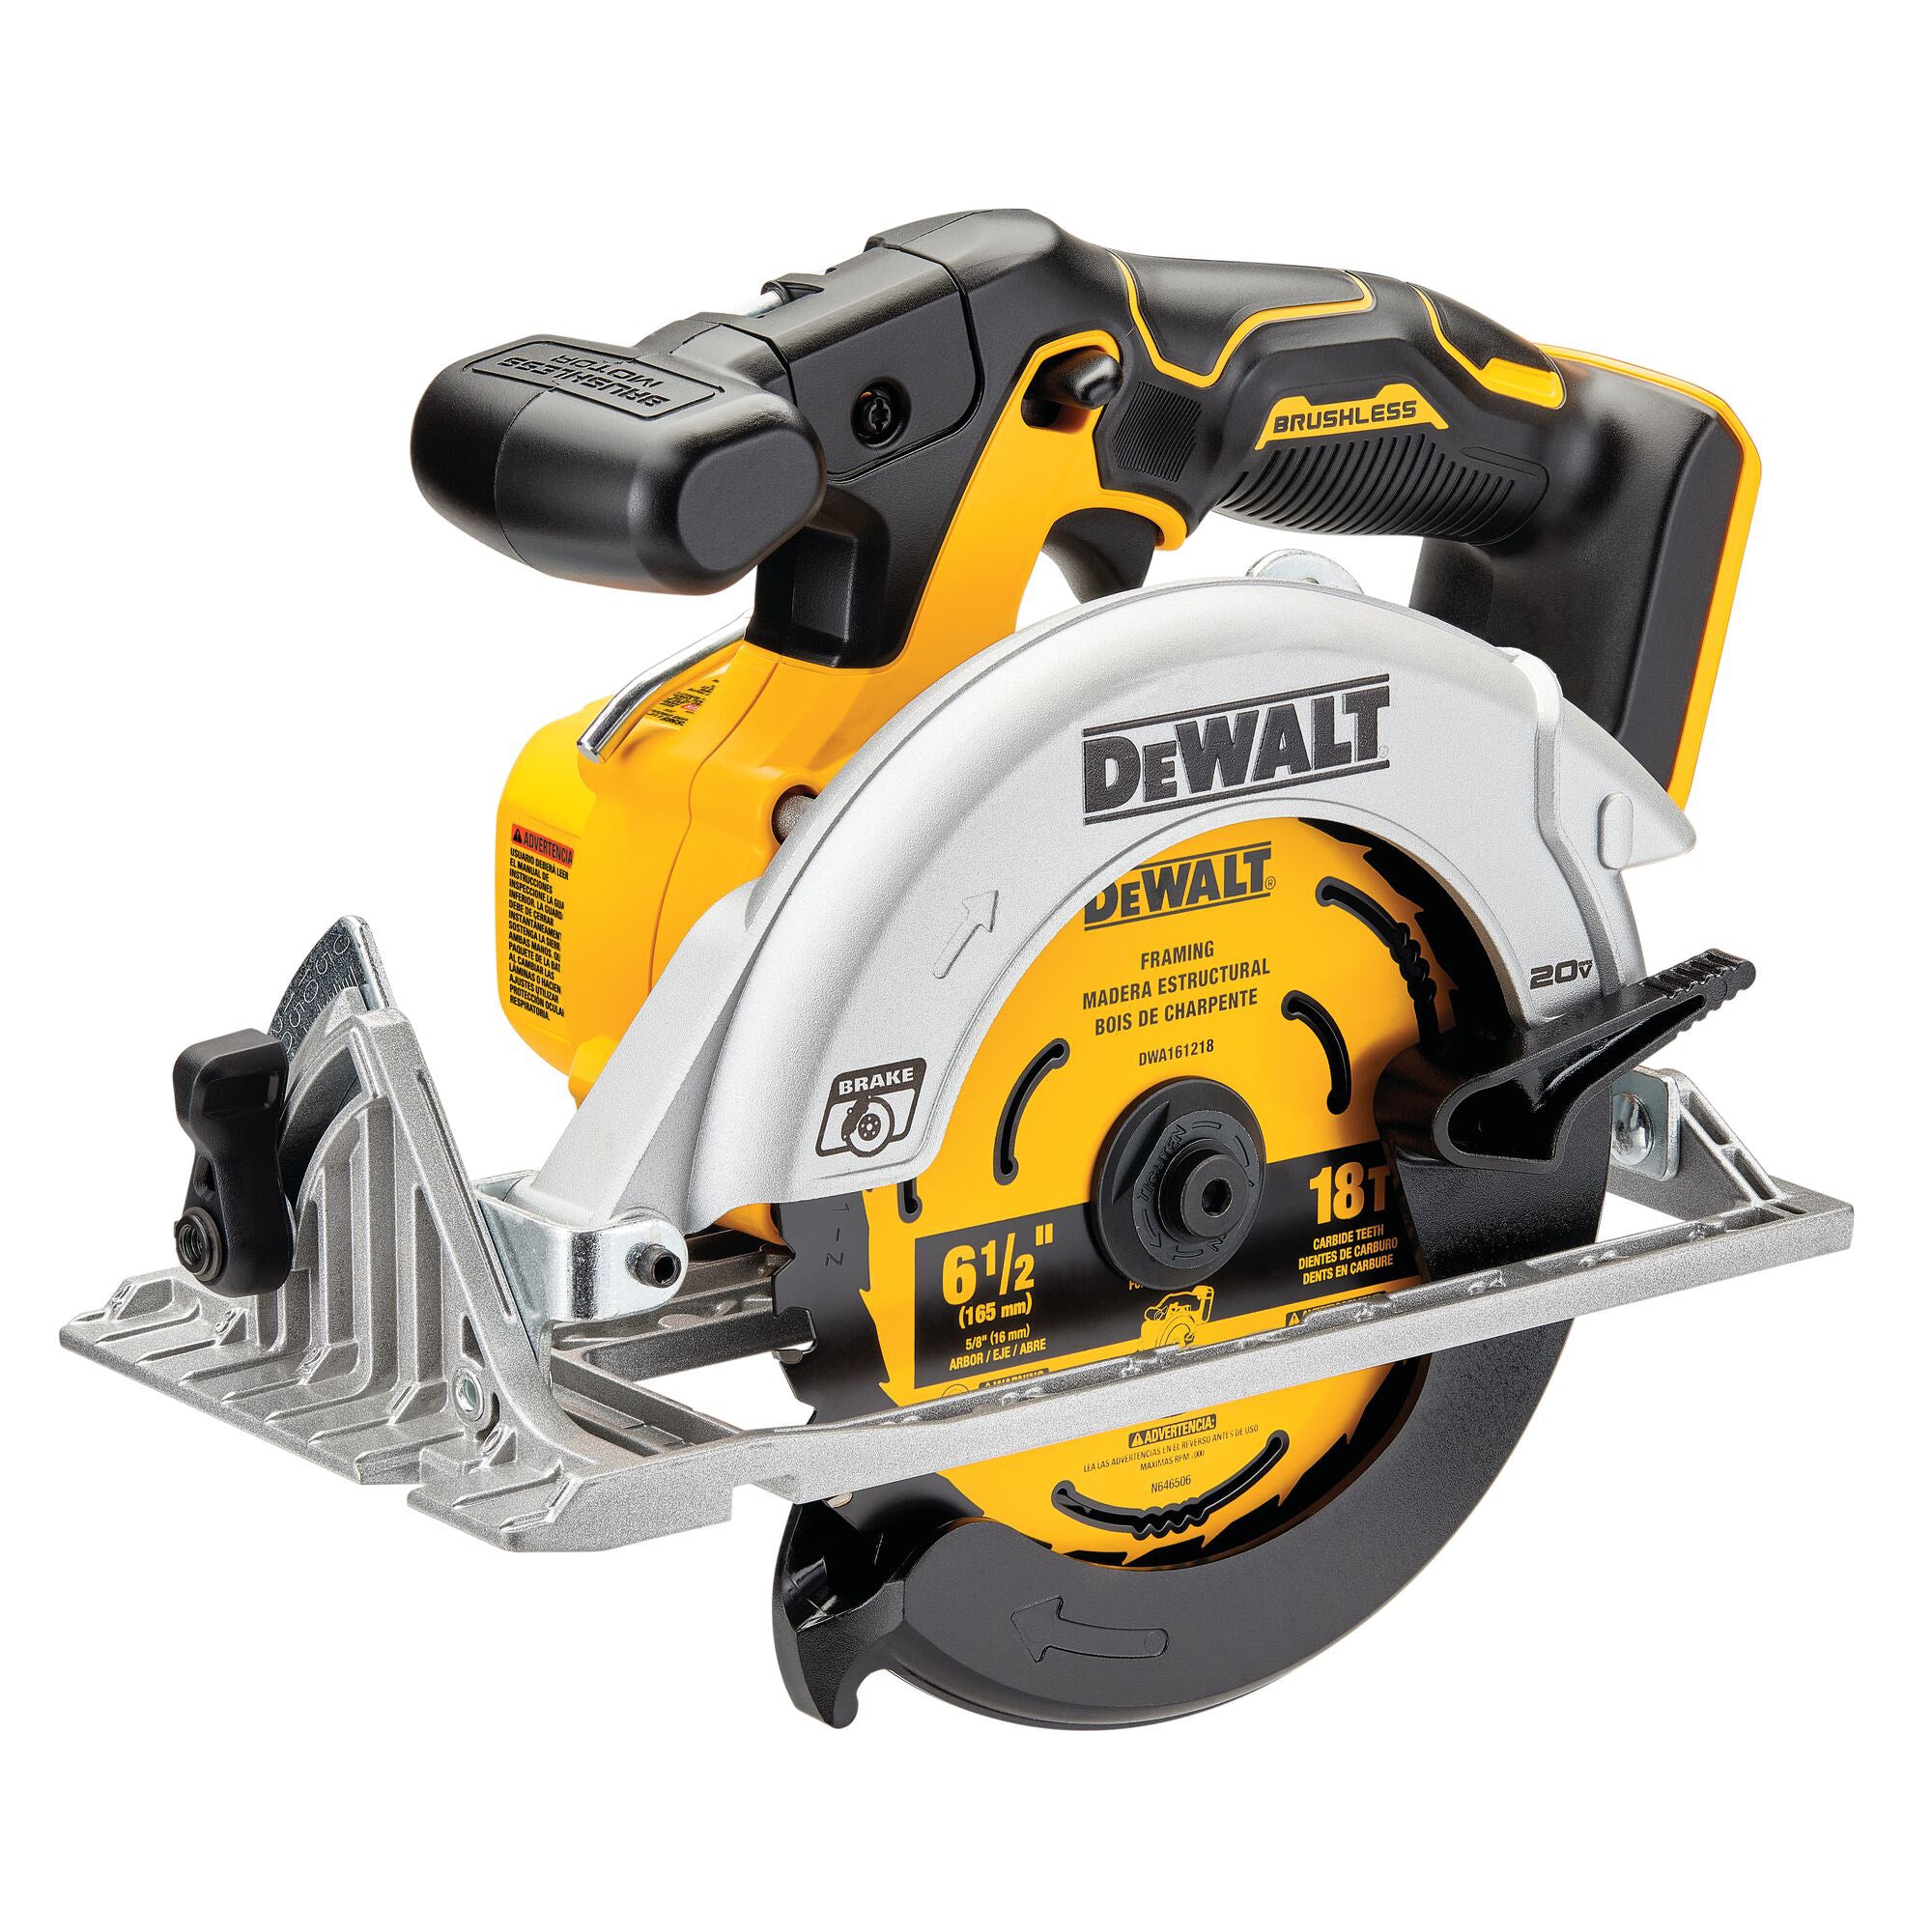 20V MAX Lithium-Ion 6-1/2" Brushless Cordless Circular Saw (Tool Only)